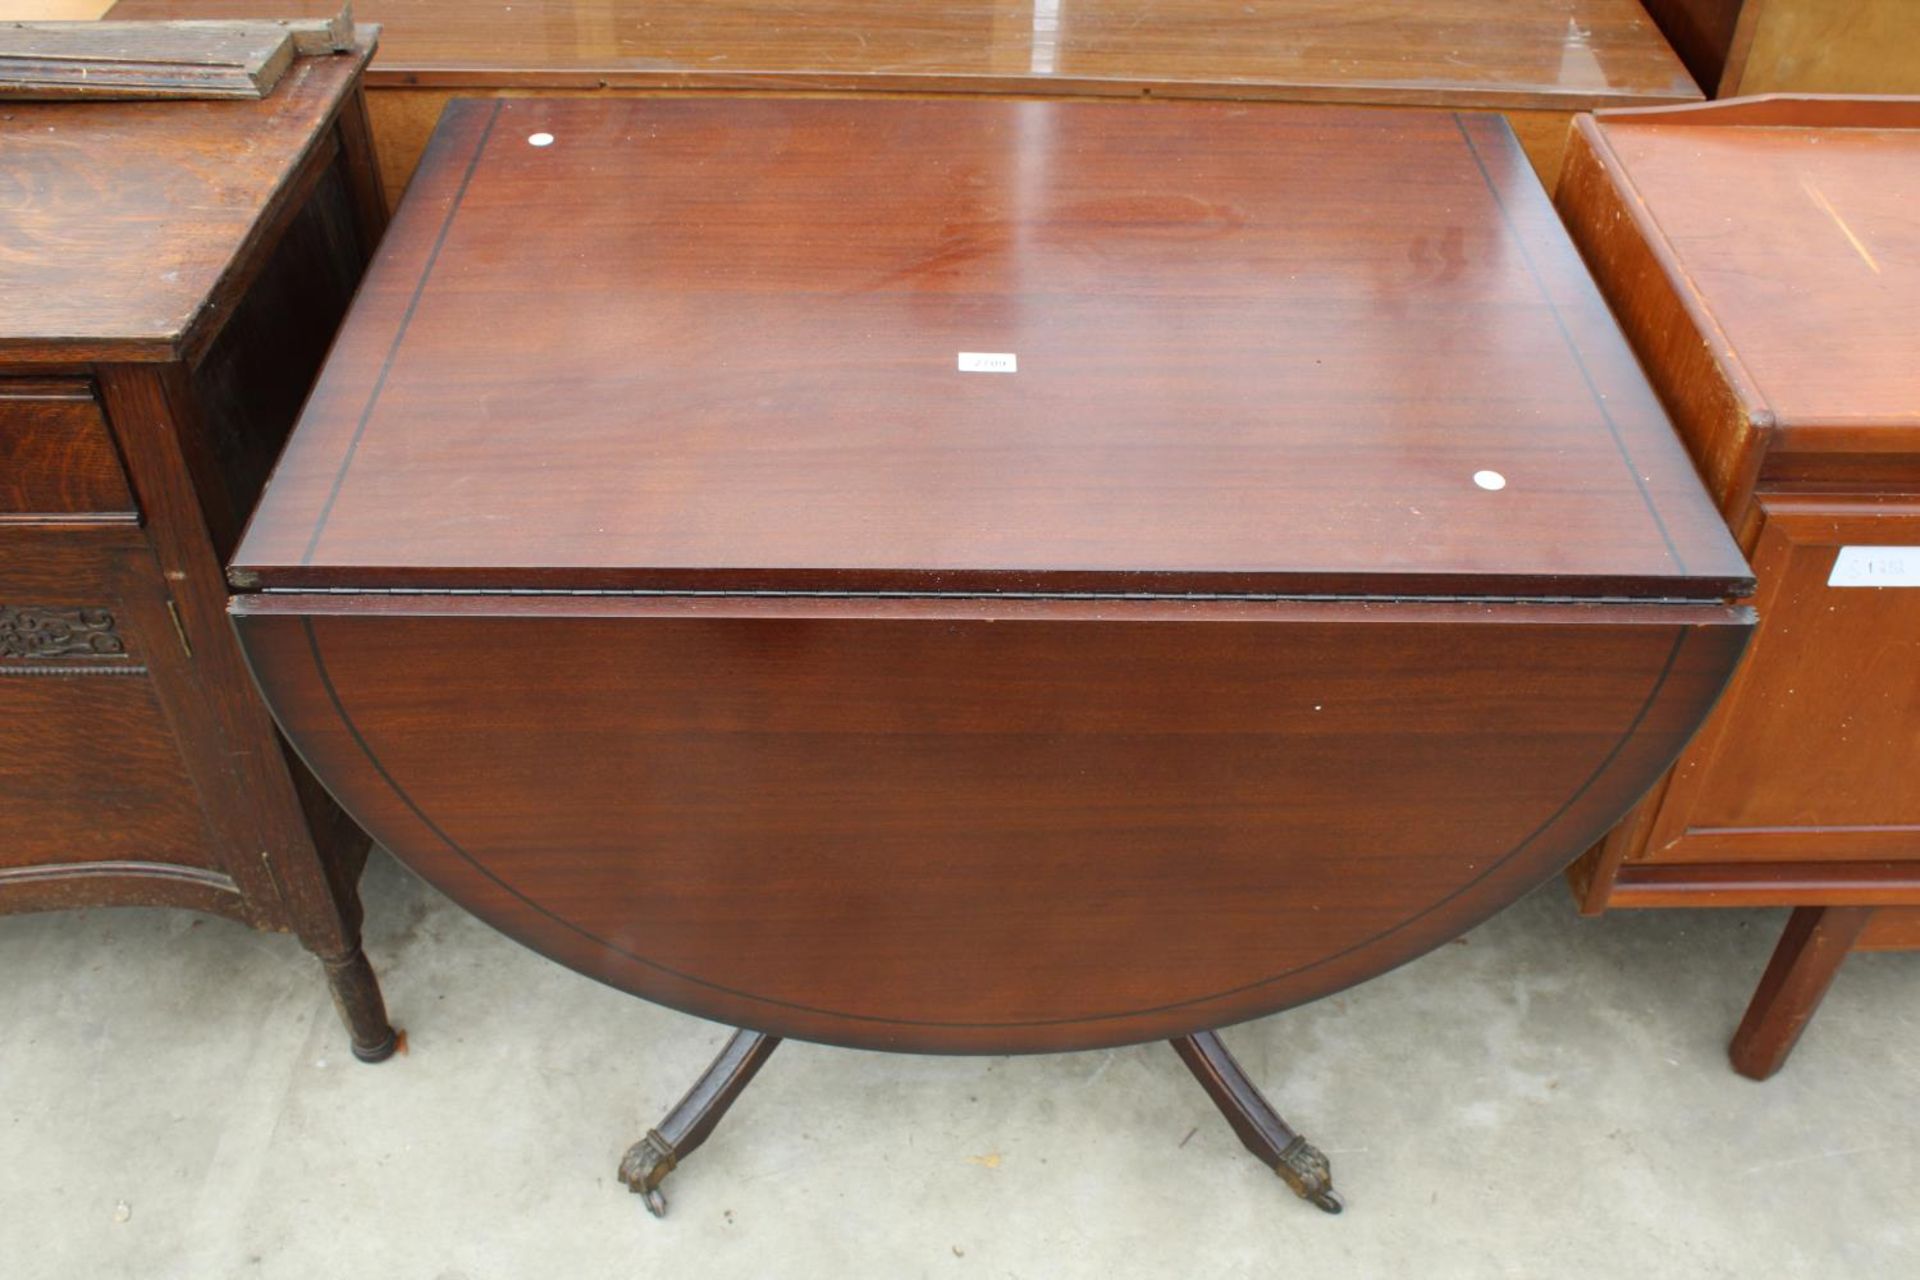 A REGENCY STYLE MAHOGANY DROP-LEAF PEDESTAL DINING TABLE, 61" X 36" OPENED